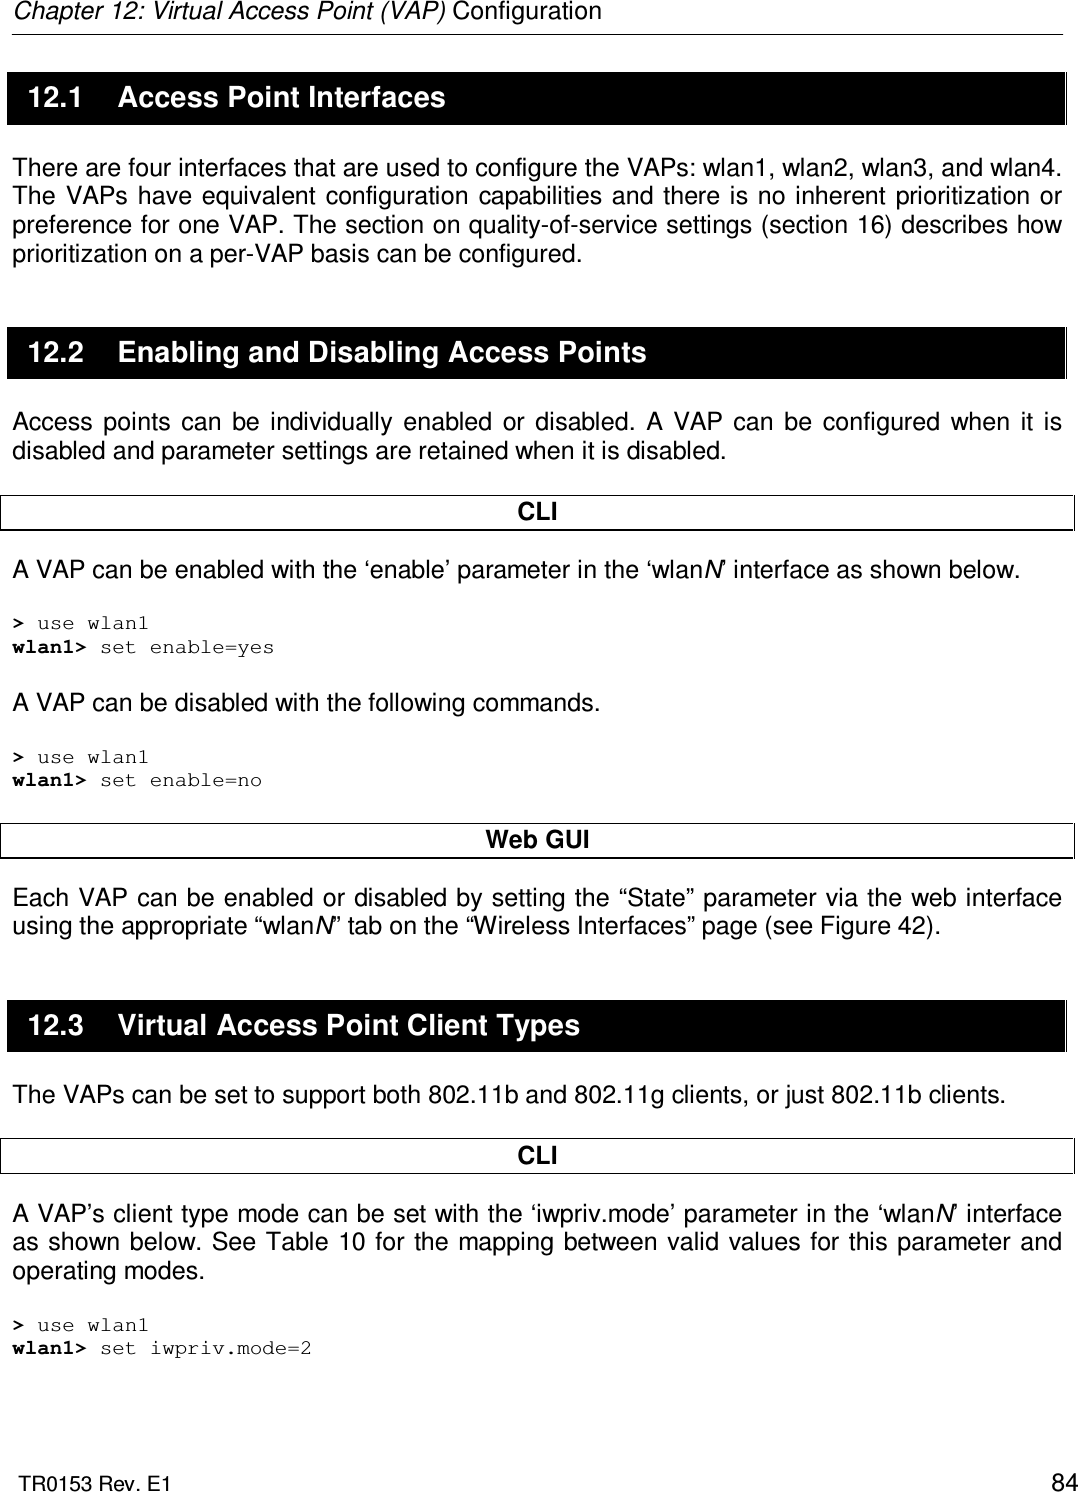 Chapter 12: Virtual Access Point (VAP) Configuration  TR0153 Rev. E1    84 12.1  Access Point Interfaces There are four interfaces that are used to configure the VAPs: wlan1, wlan2, wlan3, and wlan4. The  VAPs  have equivalent  configuration  capabilities and there is  no  inherent prioritization  or preference for one VAP. The section on quality-of-service settings (section 16) describes how prioritization on a per-VAP basis can be configured. 12.2  Enabling and Disabling Access Points Access  points  can  be  individually  enabled  or  disabled.  A  VAP  can  be  configured  when  it  is disabled and parameter settings are retained when it is disabled.  CLI A VAP can be enabled with the ‘enable’ parameter in the ‘wlanN’ interface as shown below.  &gt; use wlan1 wlan1&gt; set enable=yes  A VAP can be disabled with the following commands.  &gt; use wlan1 wlan1&gt; set enable=no  Web GUI Each VAP can be enabled or disabled by setting the “State” parameter via the web interface using the appropriate “wlanN” tab on the “Wireless Interfaces” page (see Figure 42).  12.3  Virtual Access Point Client Types The VAPs can be set to support both 802.11b and 802.11g clients, or just 802.11b clients.   CLI A VAP’s client type mode can be set with the ‘iwpriv.mode’ parameter in the ‘wlanN’ interface as shown below. See Table  10 for the mapping between valid values for this parameter and operating modes.  &gt; use wlan1 wlan1&gt; set iwpriv.mode=2  